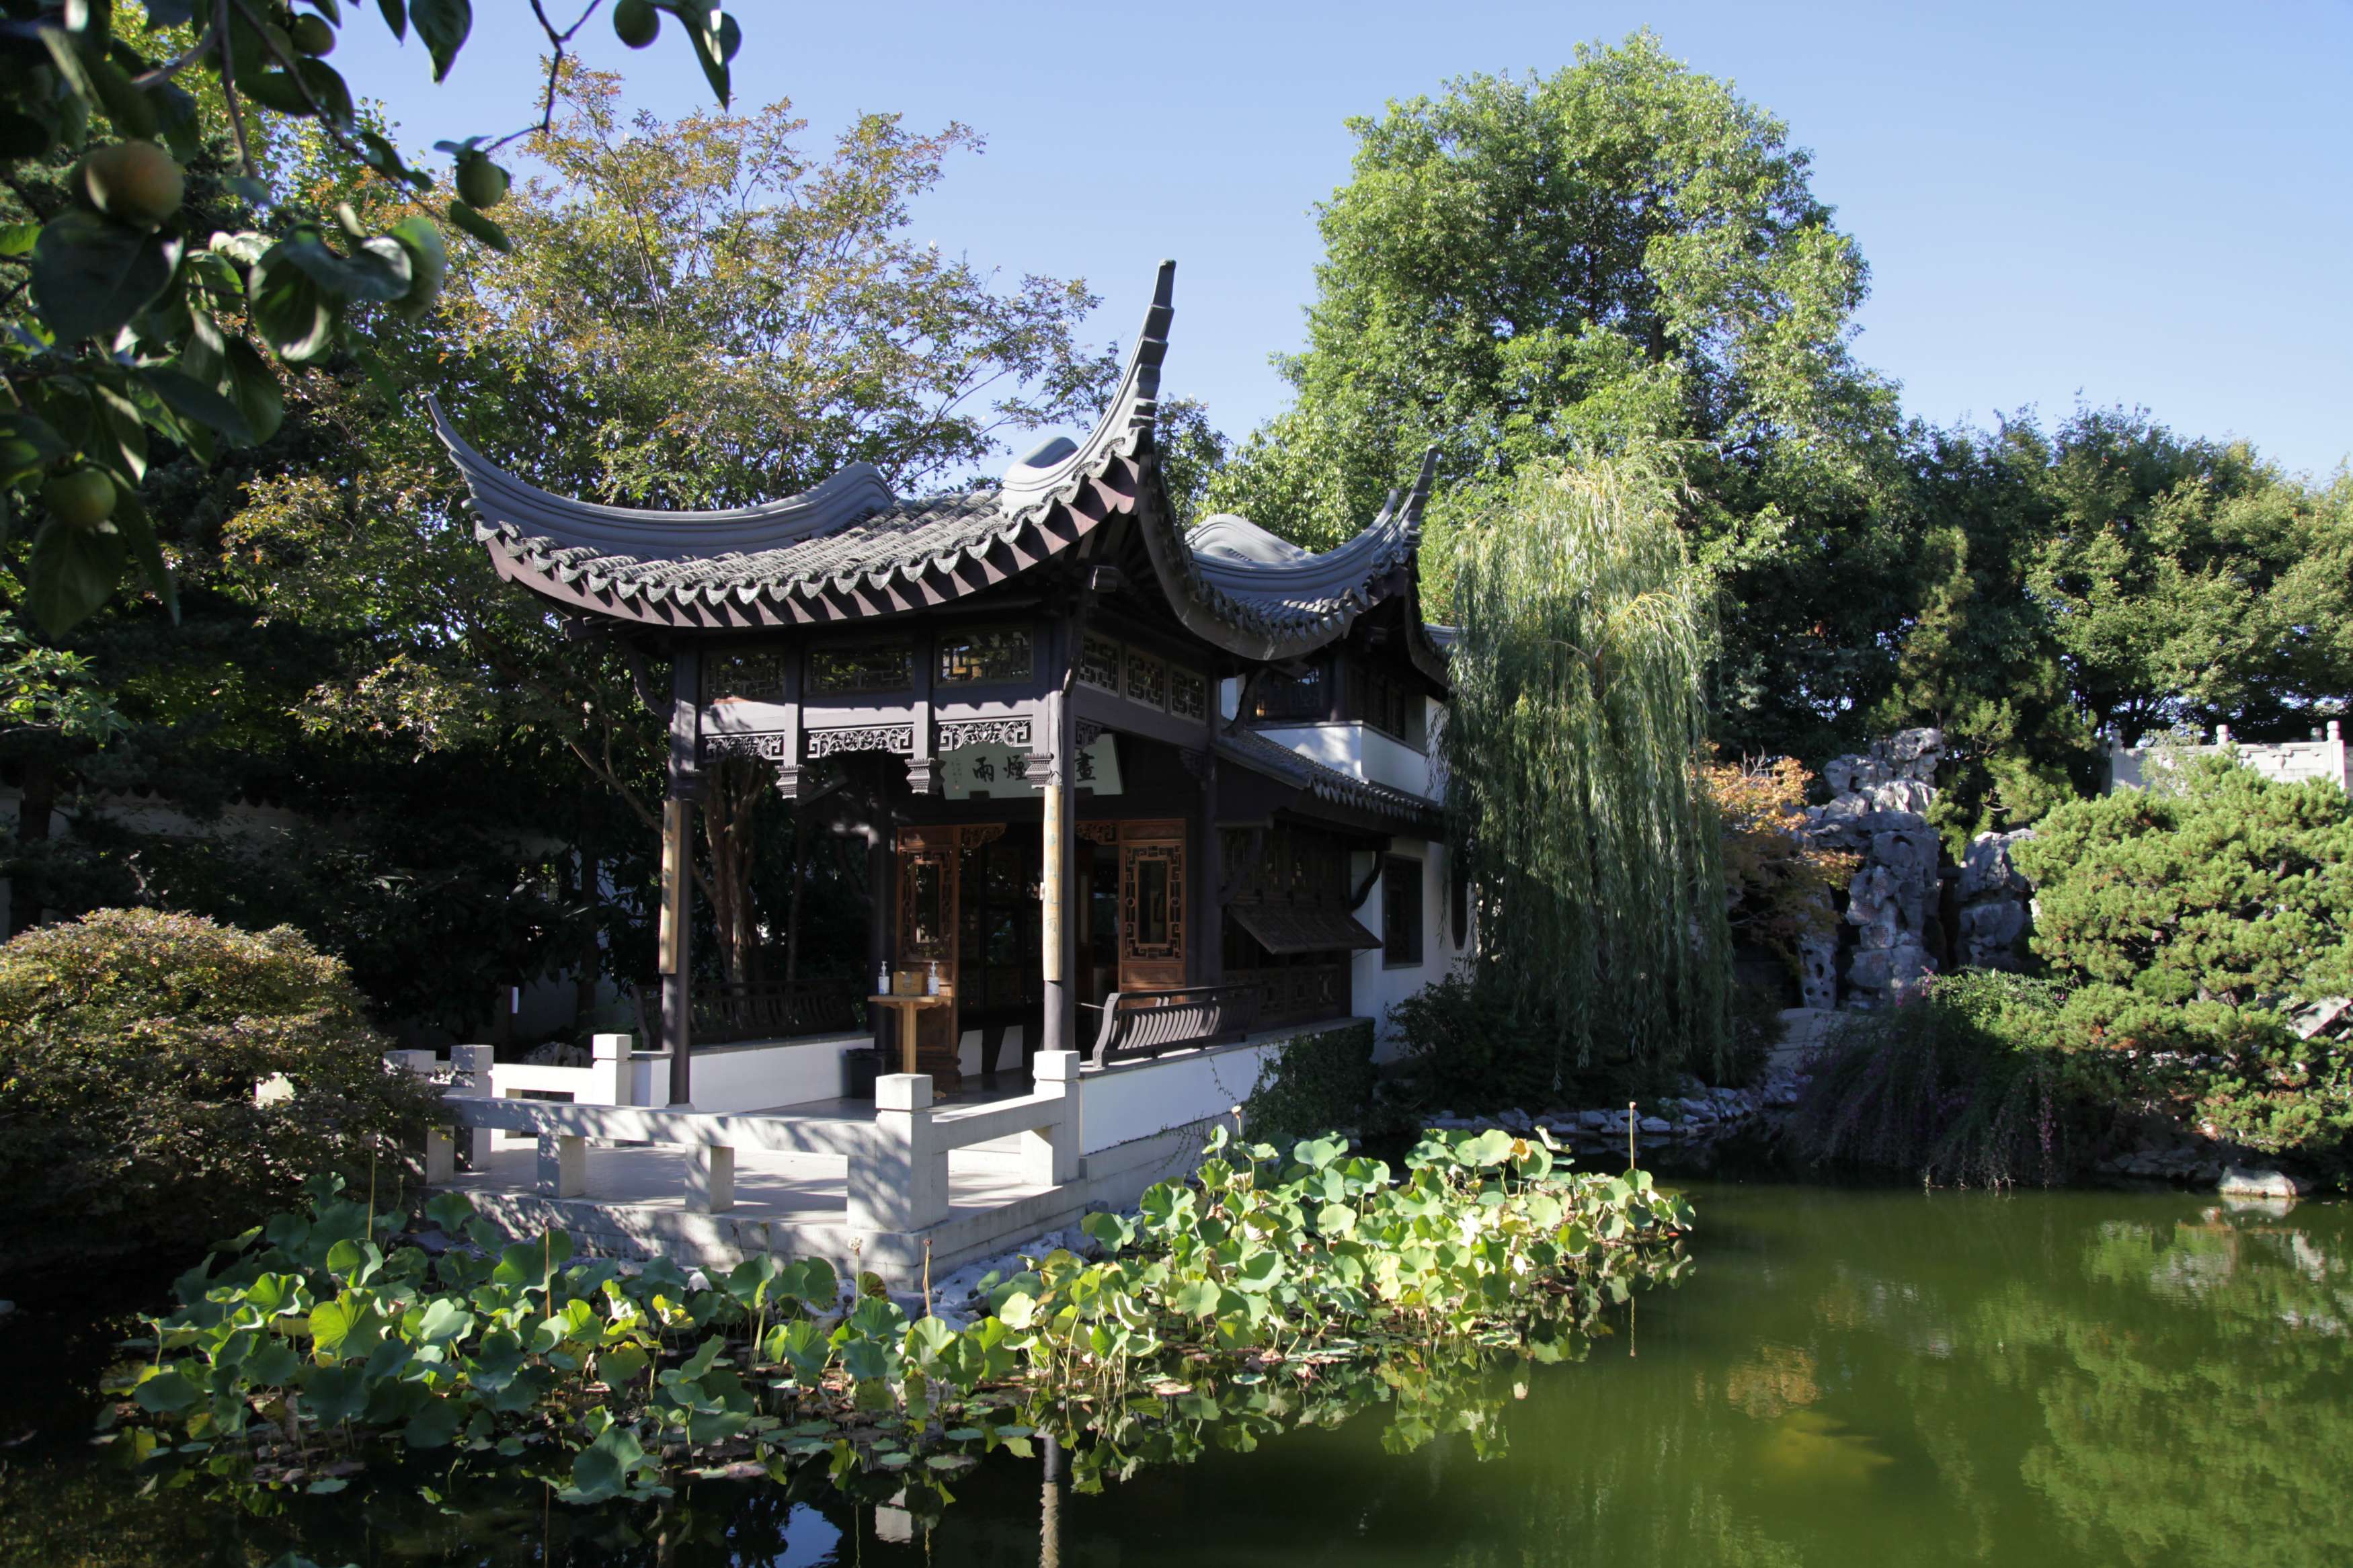 A pagoda in the middle of a traditional Chinese garden.